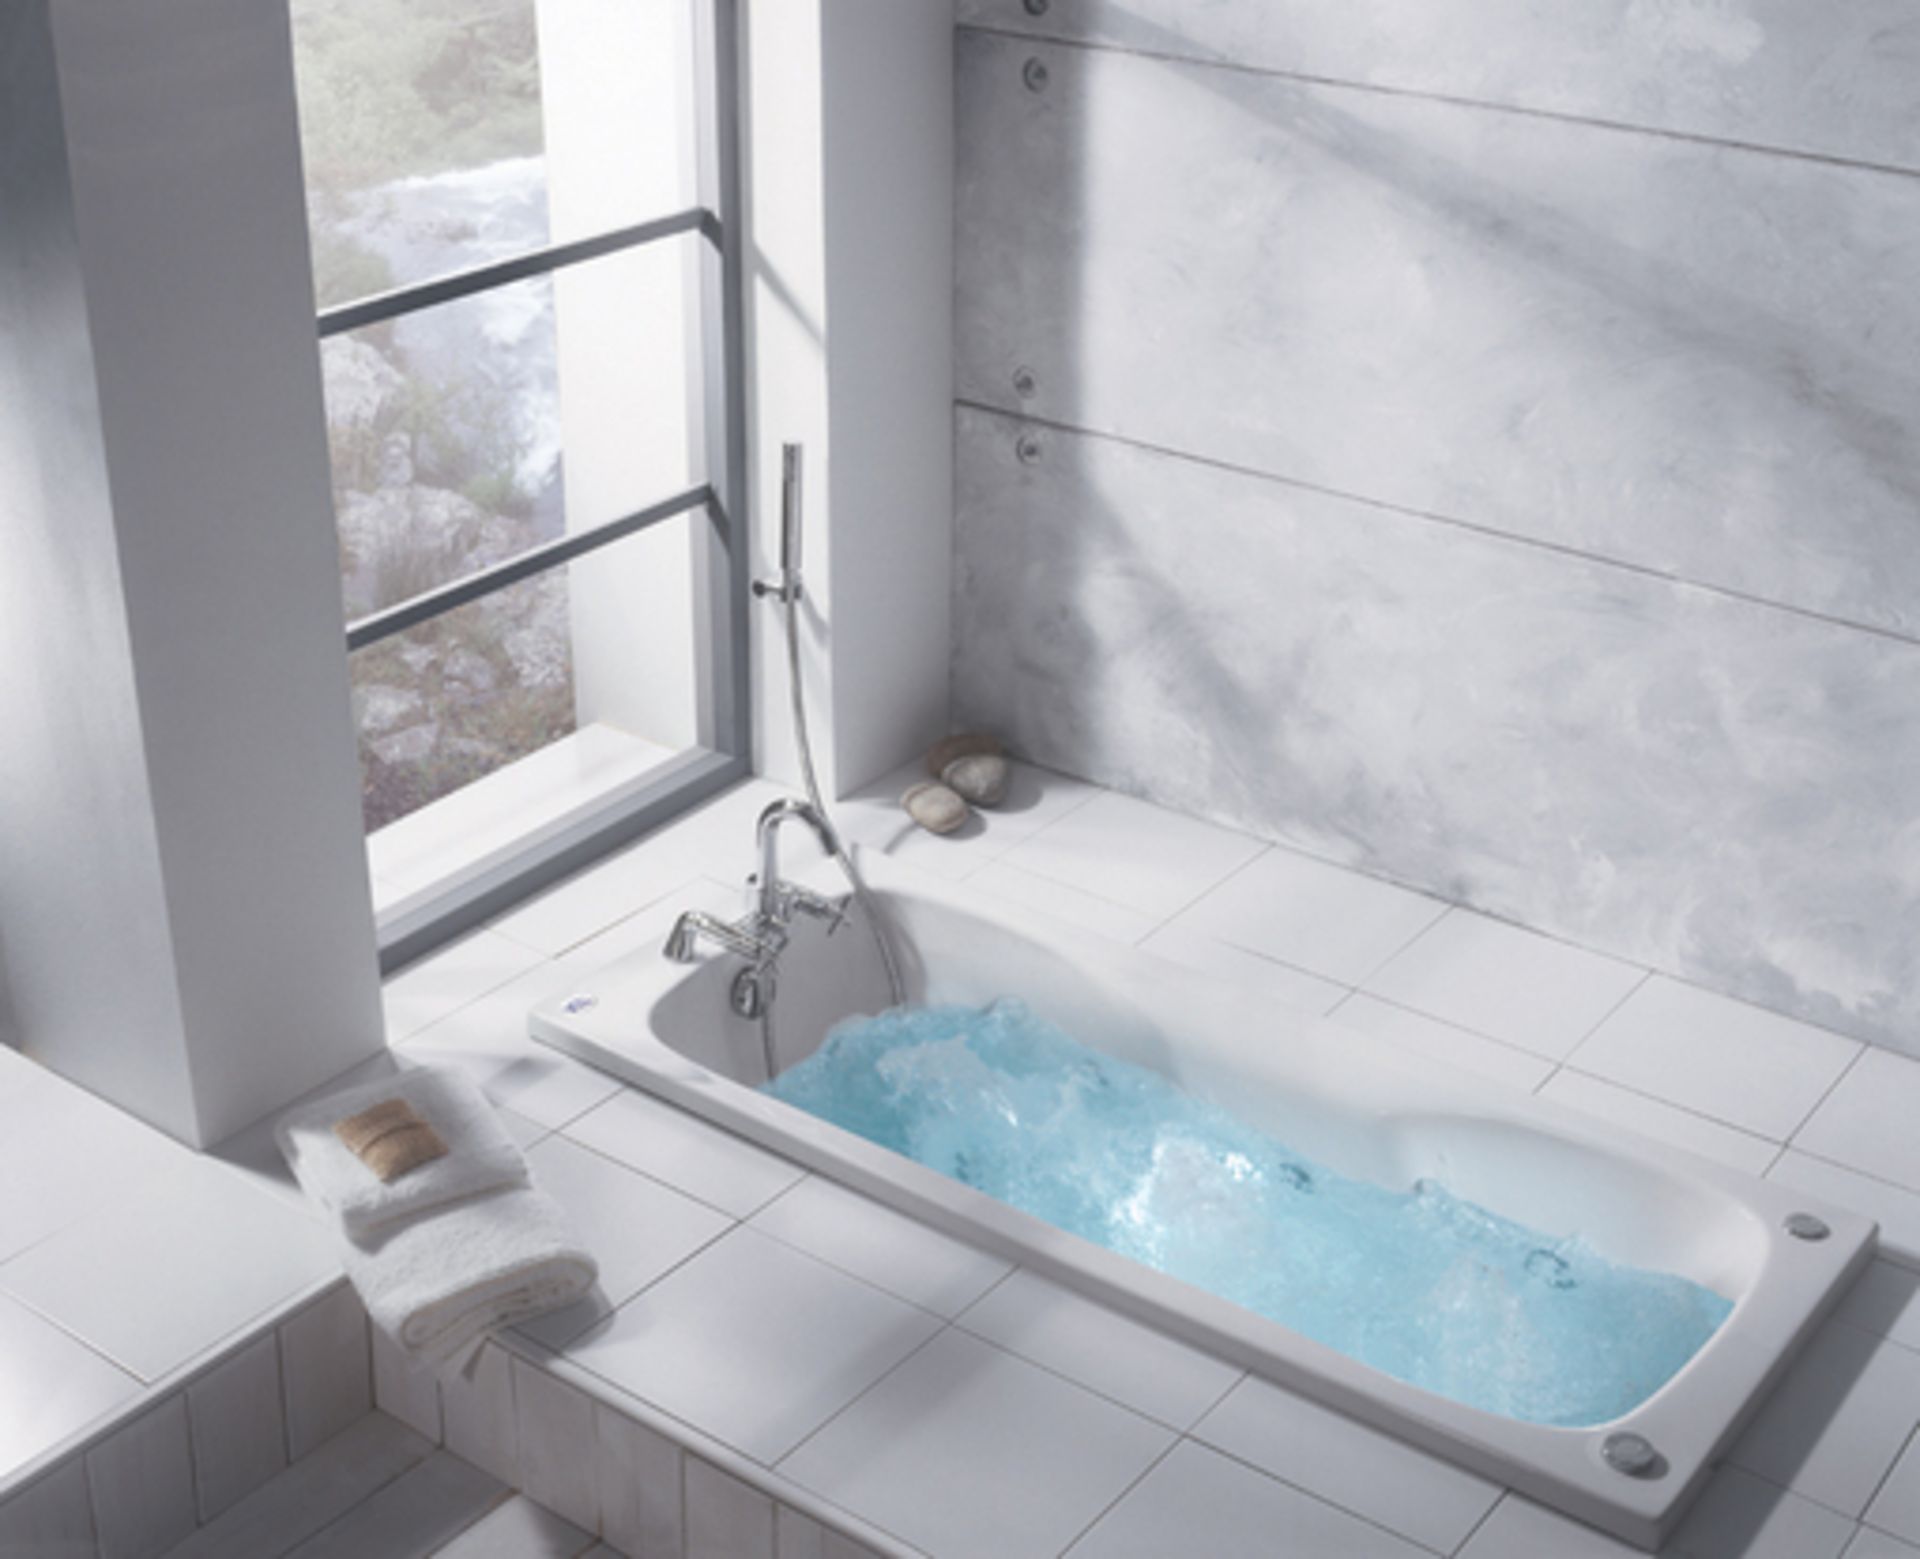 1 x Kudos Single End Inset Bath Tub - Vogue Bathrooms - 1800x800mm - Brand New Stock - Ref P6 - High - Image 4 of 4